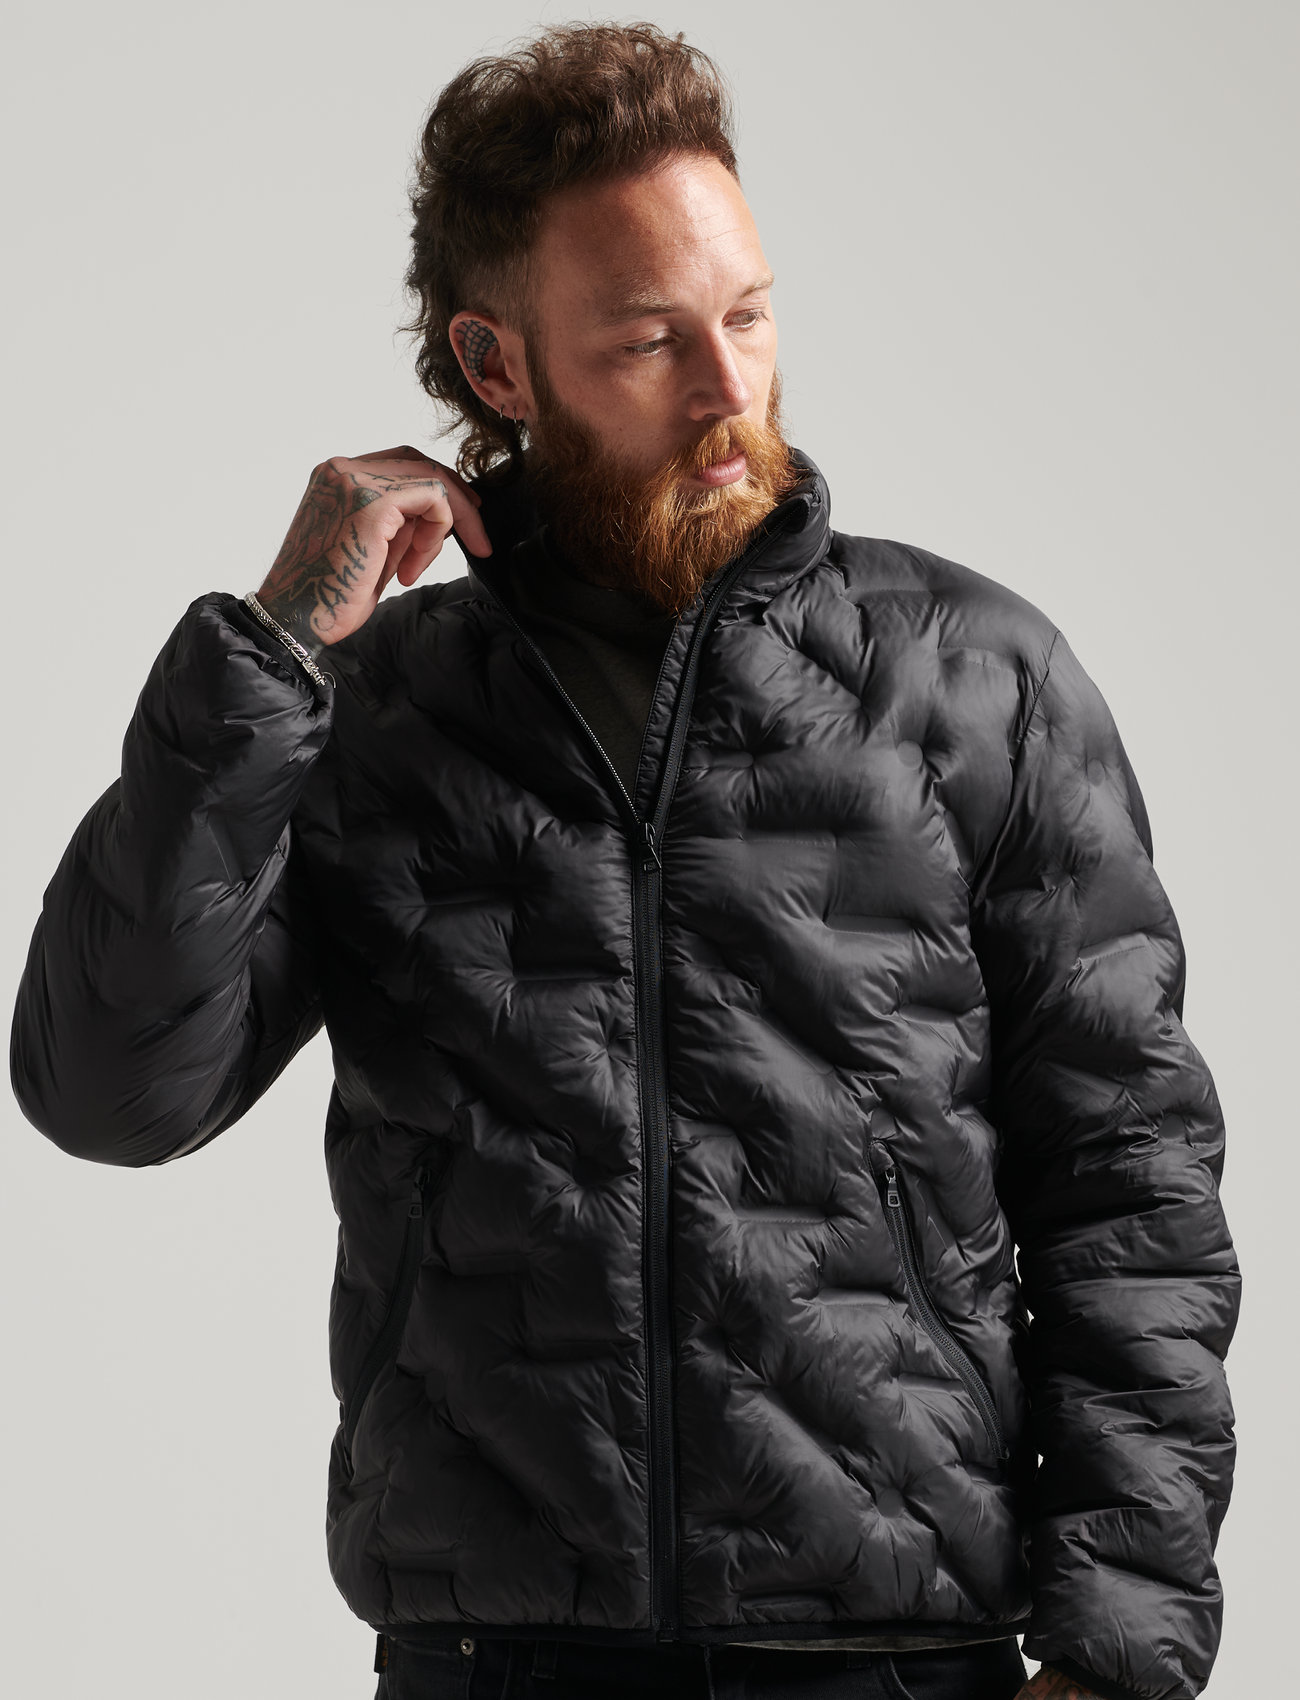 Superdry Studios Heat Seal Quilt - 76.49 €. Buy Padded jackets from Superdry online at Boozt.com. Fast delivery and easy returns